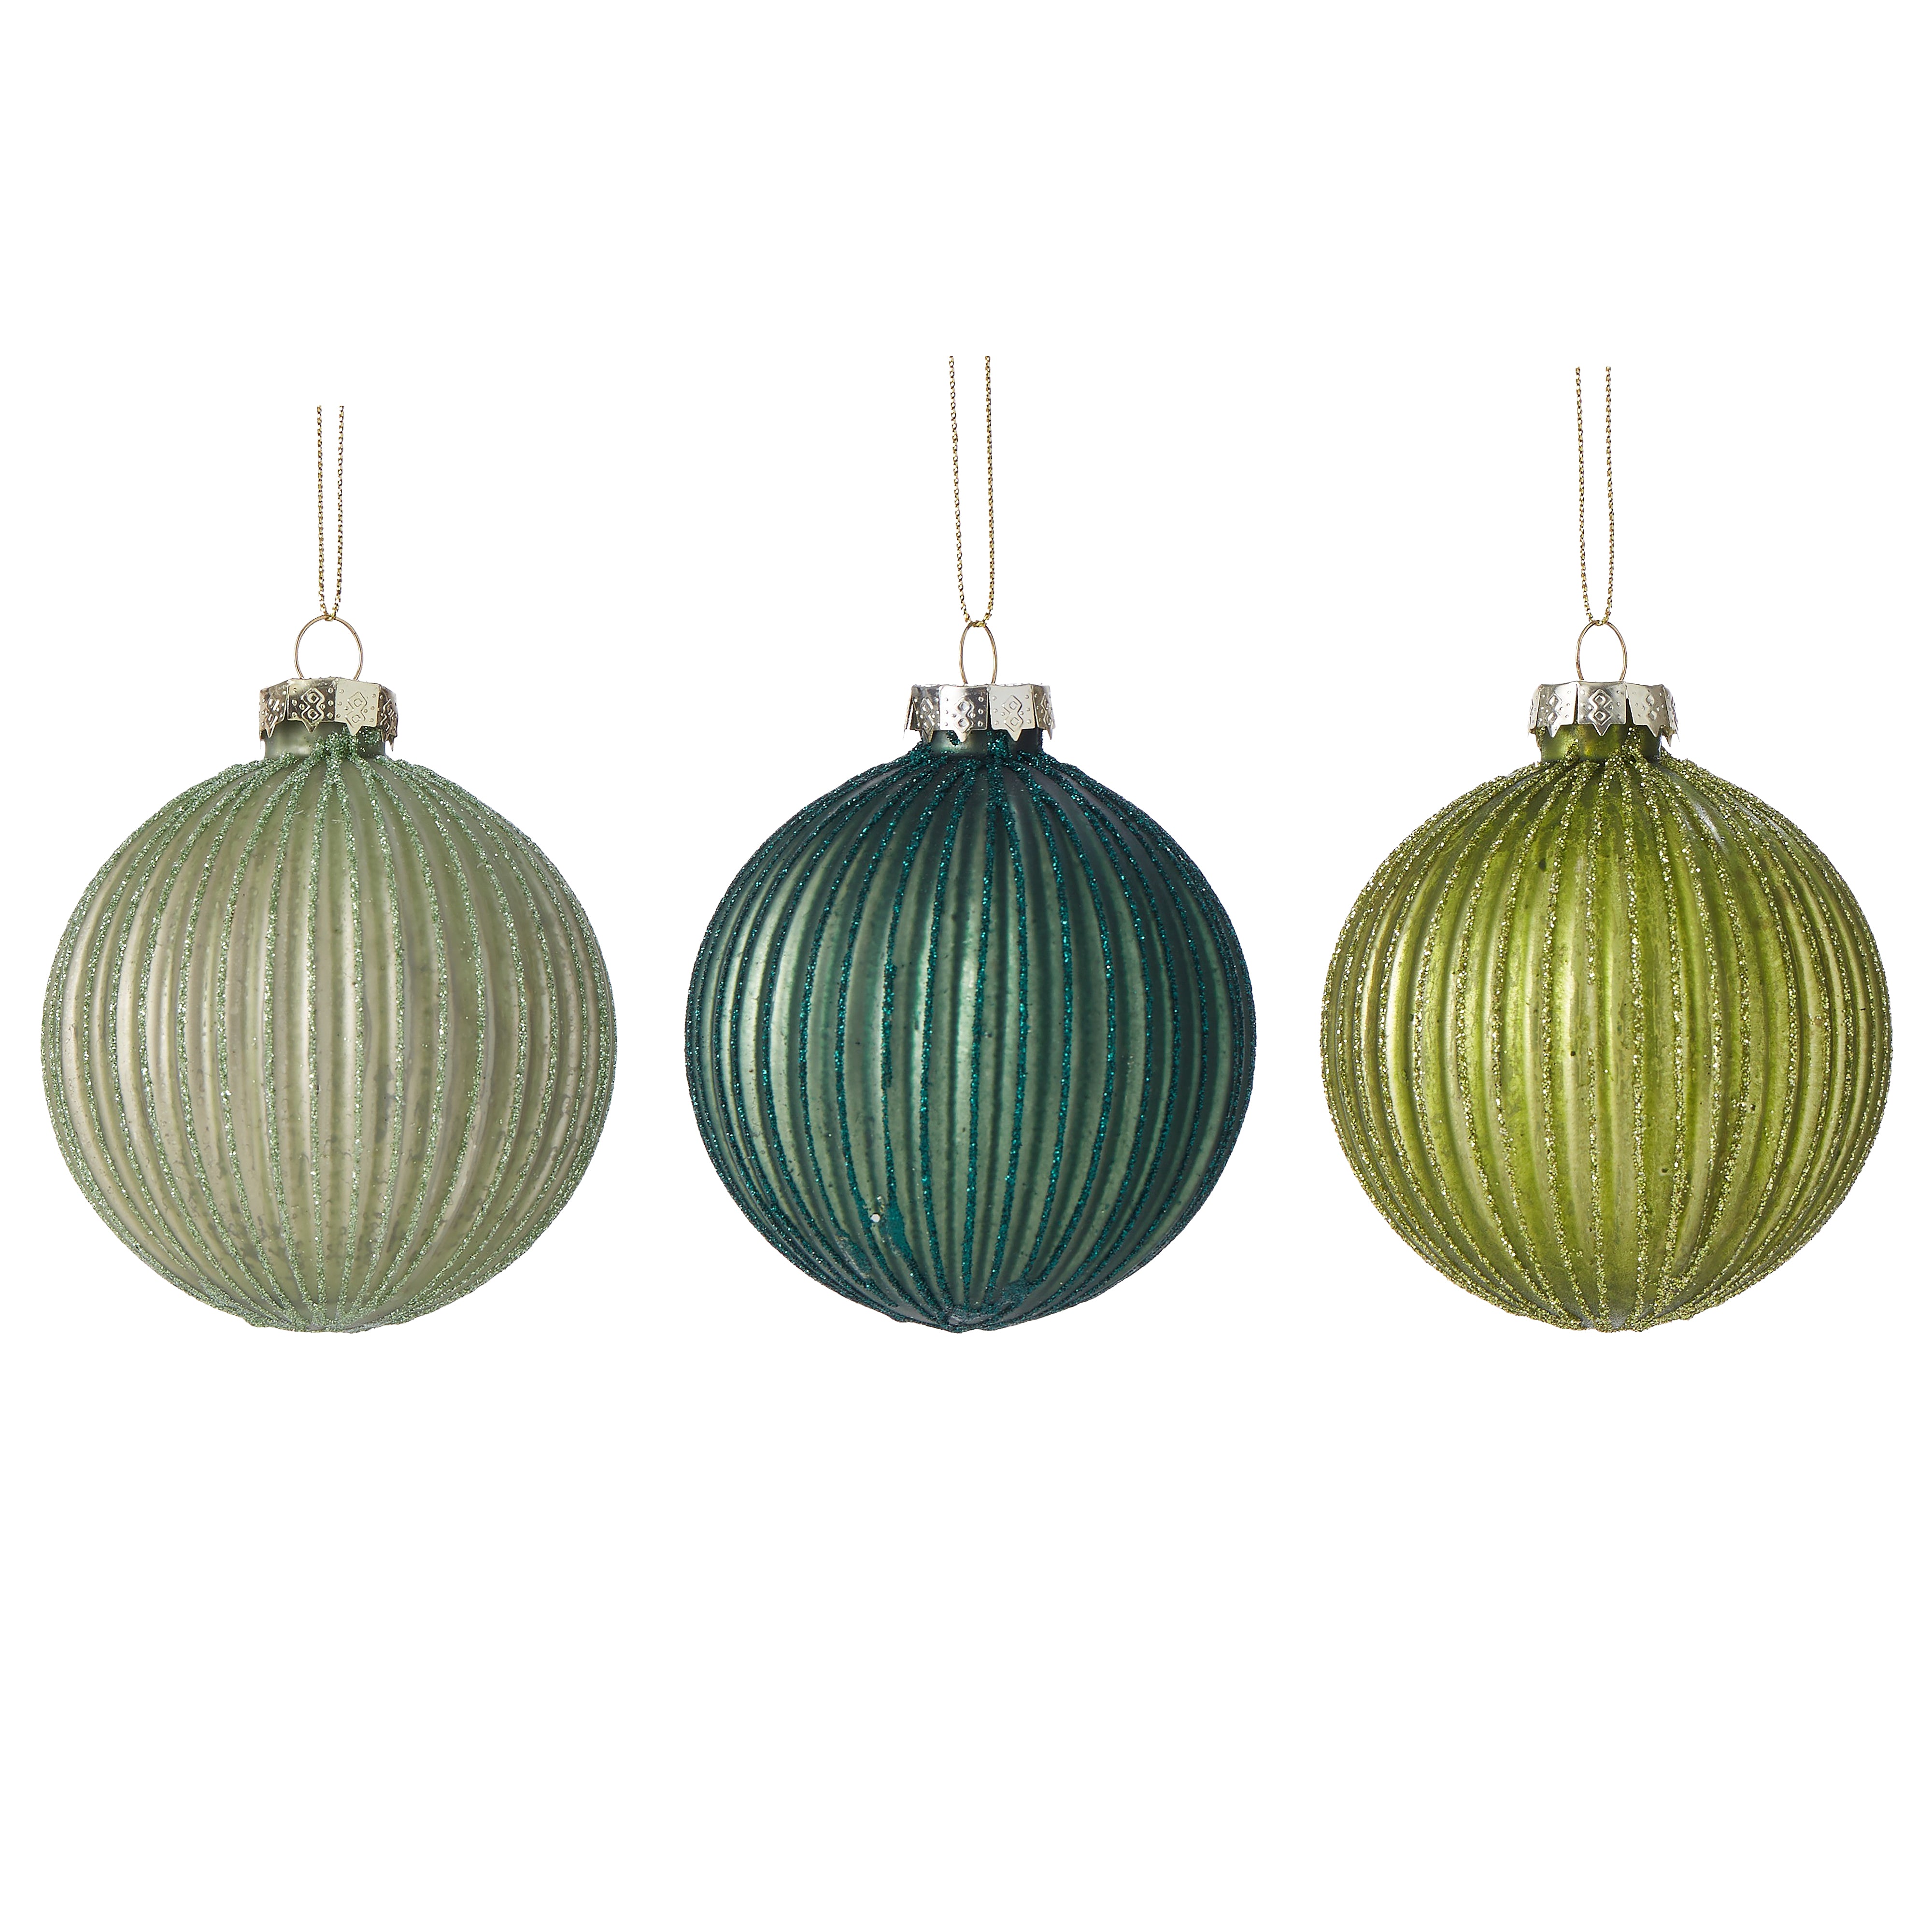 Fluted Ball Ornaments Green Set Of 3 - Gro Urban Oasis